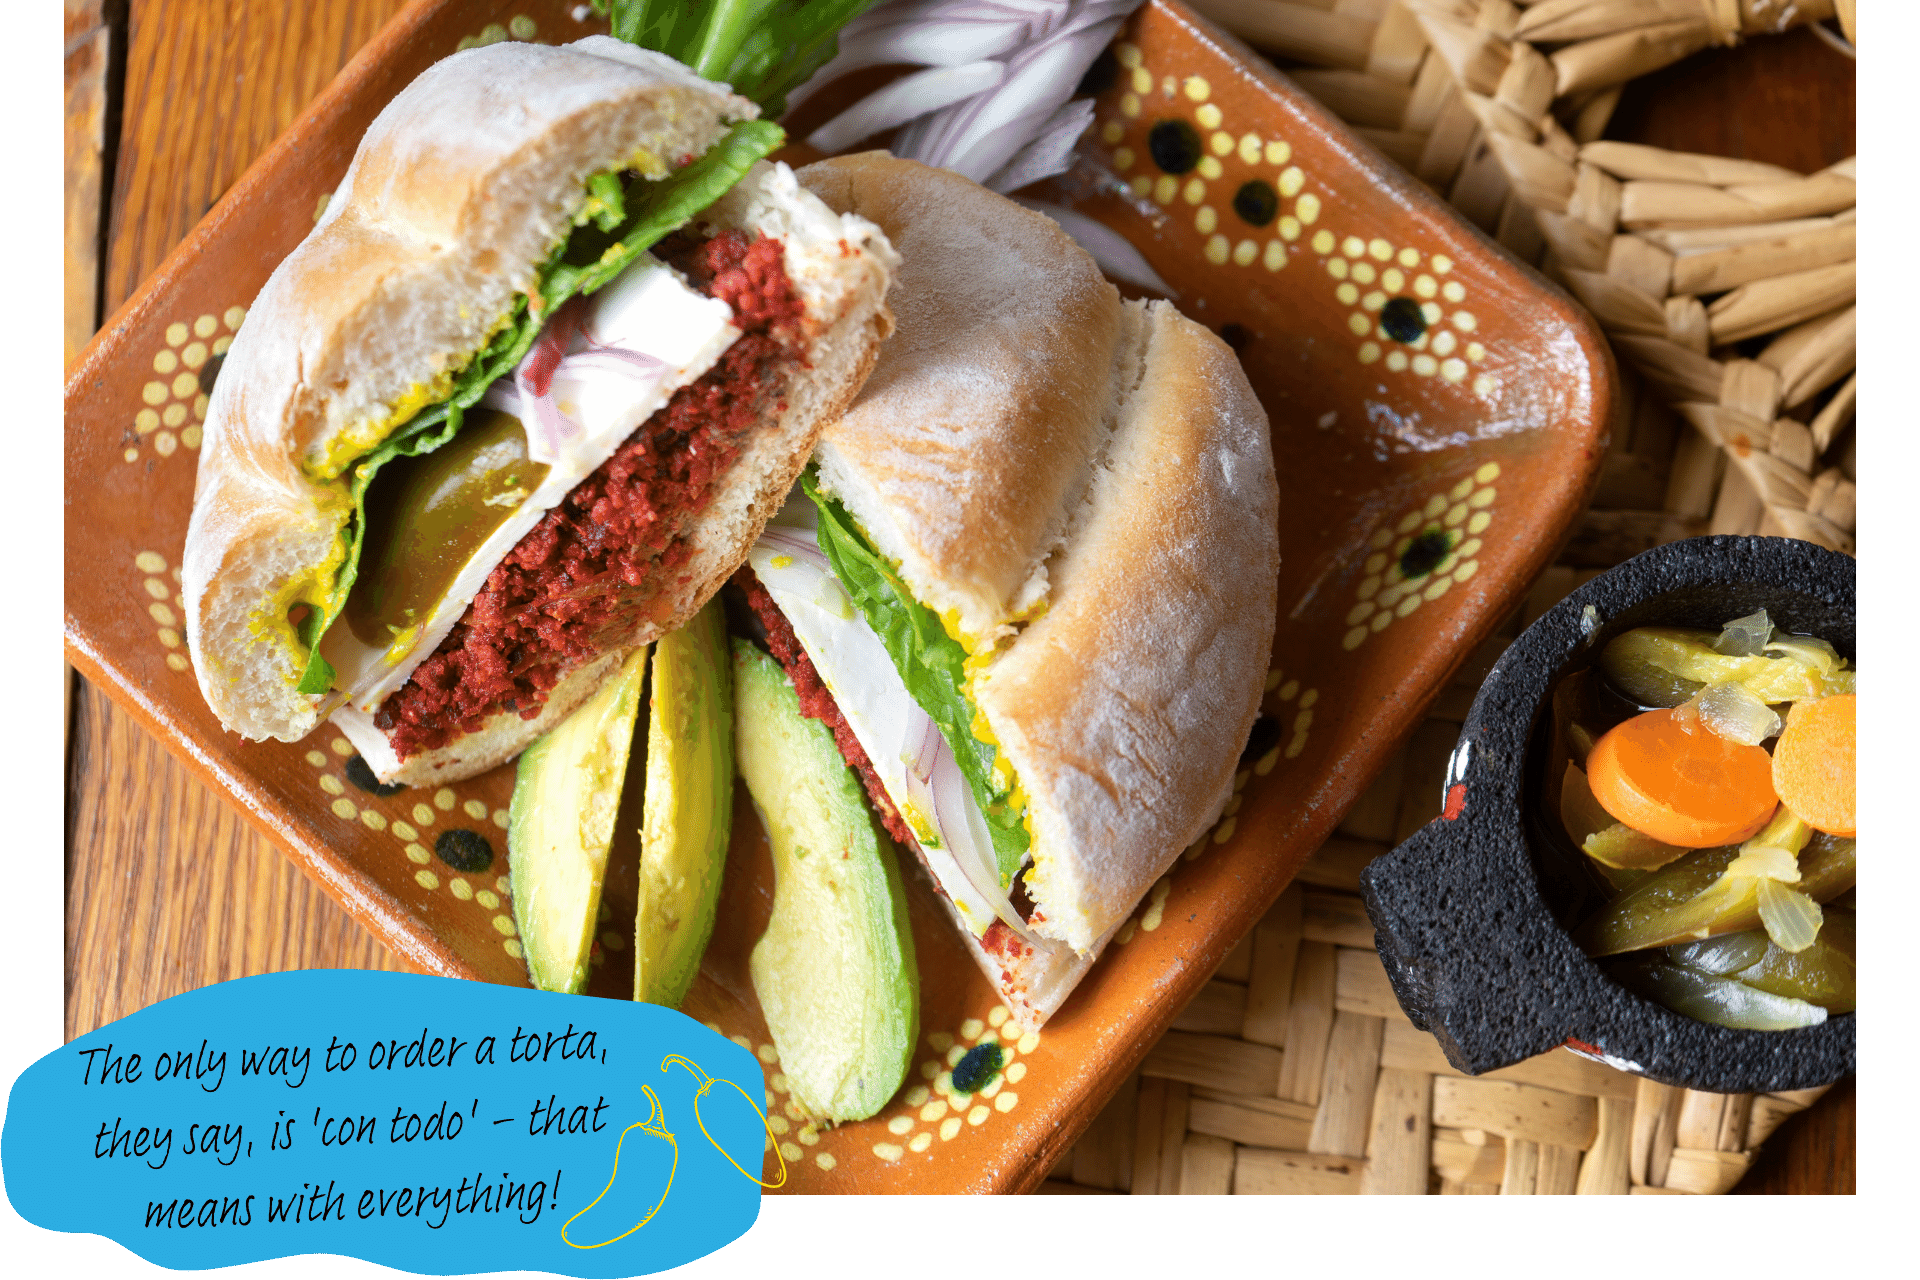 A Mexican torta sandwich sits on a plate which is decorated with various ingredients used in it, including onions and avocado.